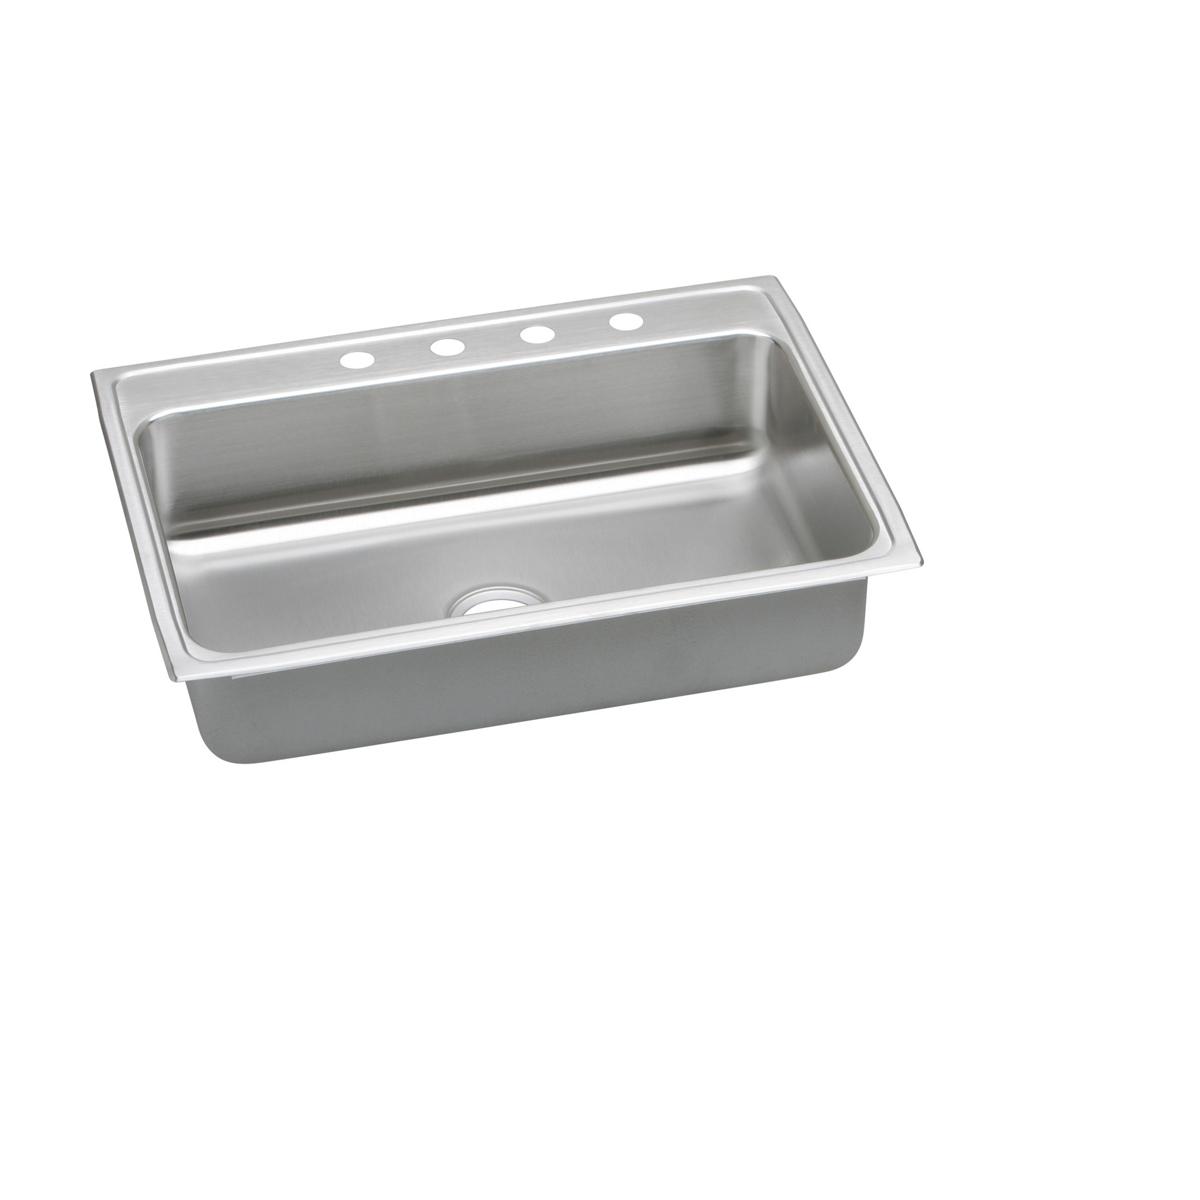 Elkay Lustertone Classic 31" x 22" x 6-1/2" MR2-Hole Single Bowl Drop-in ADA Sink with Quick-clip